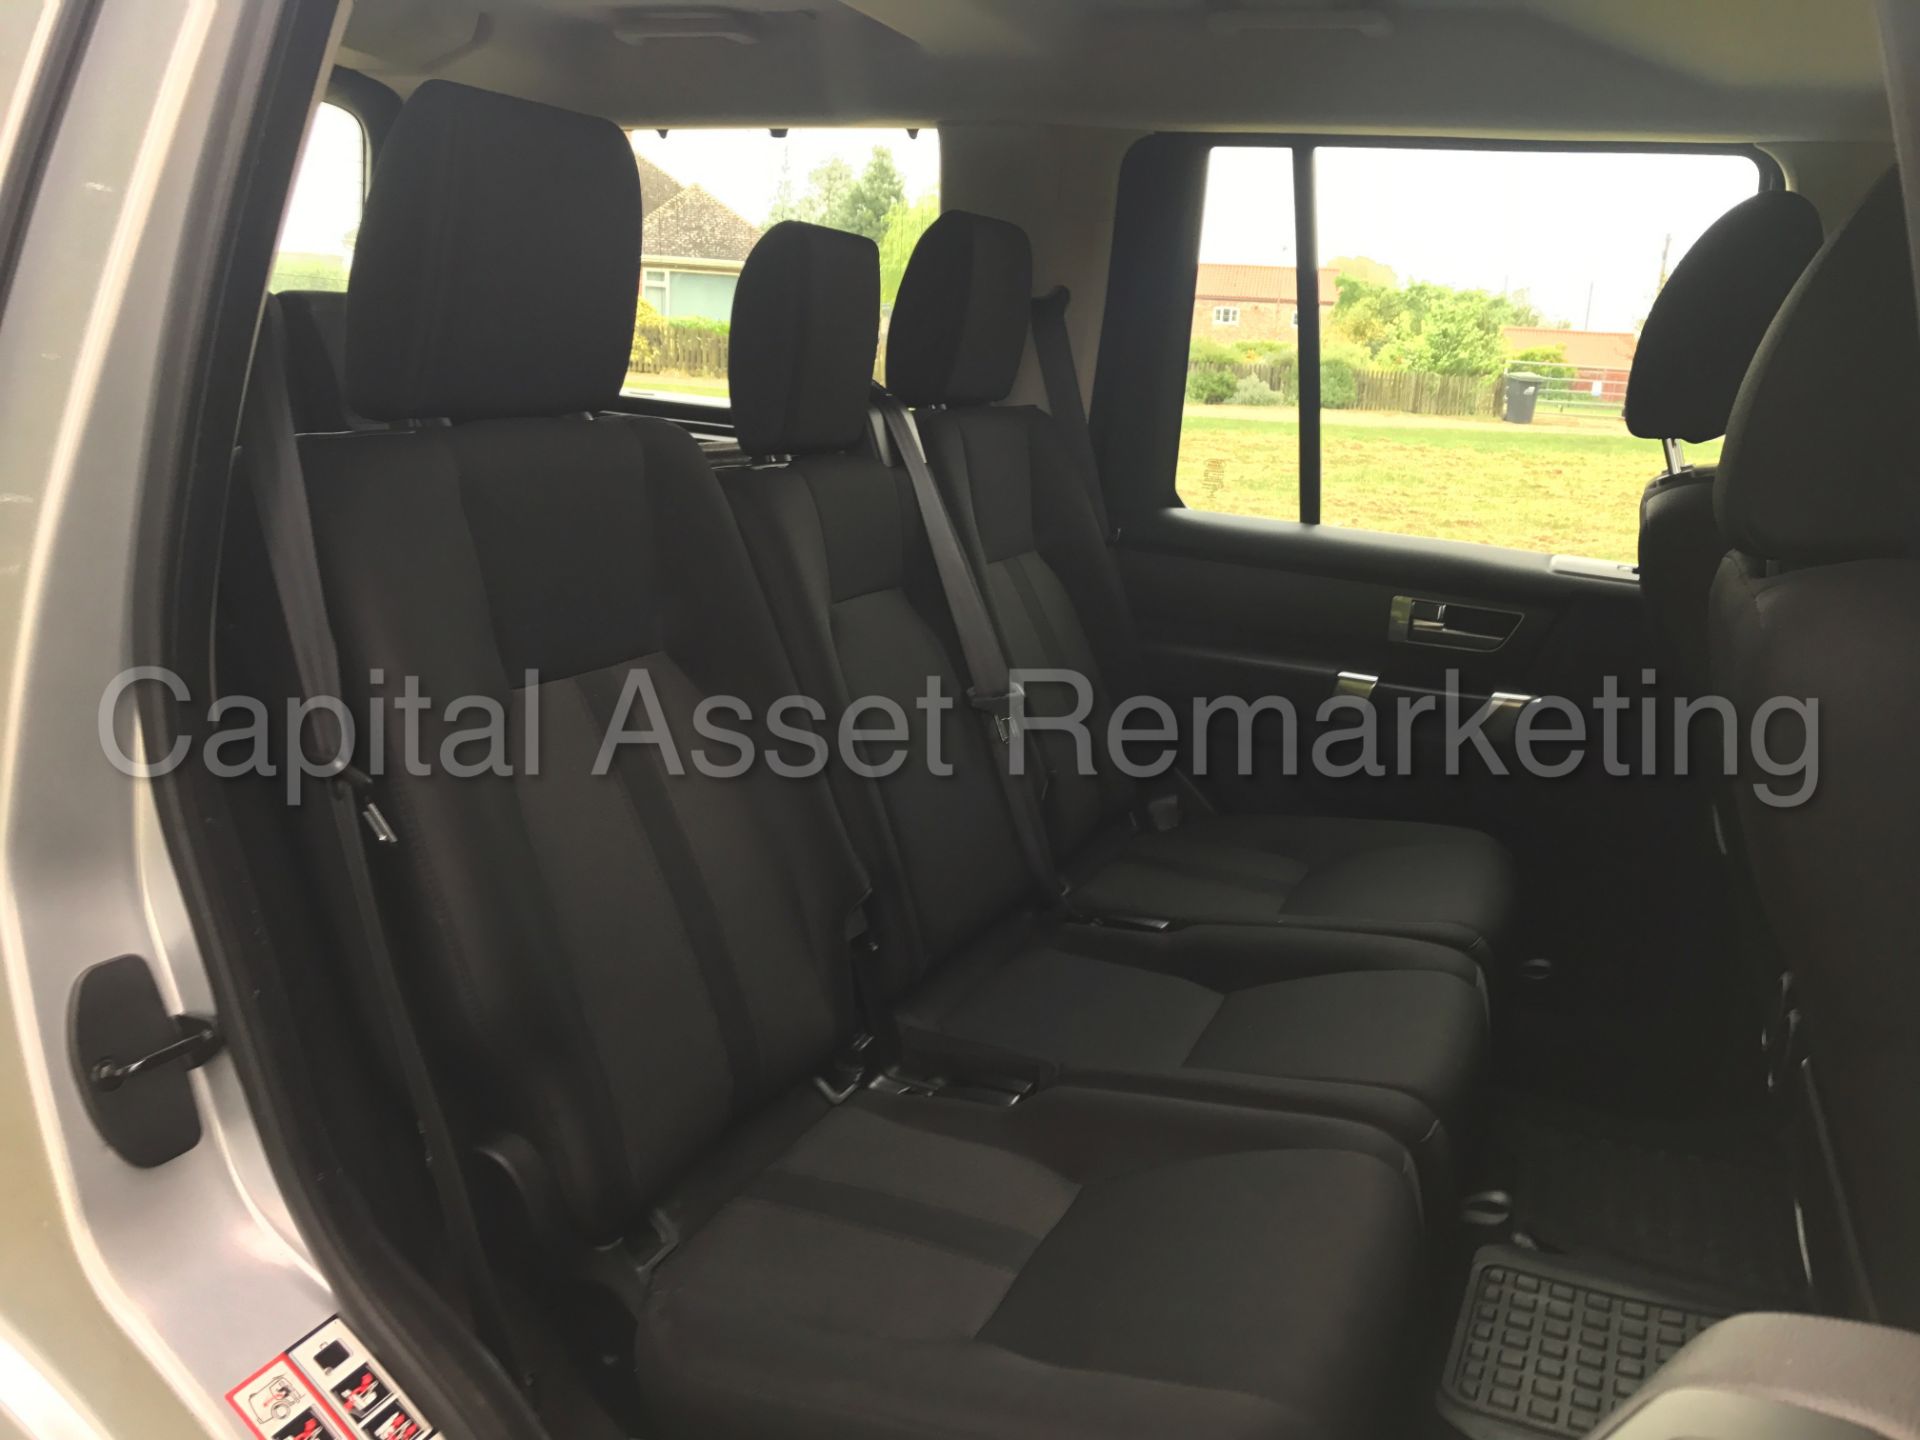 (On sale) LAND ROVER DISCOVERY 4 (2014 MODEL) '3.0 SDV6 -AUTO- 255 BHP - 7 SEATER'(1 OWNER FROM NEW) - Image 22 of 42